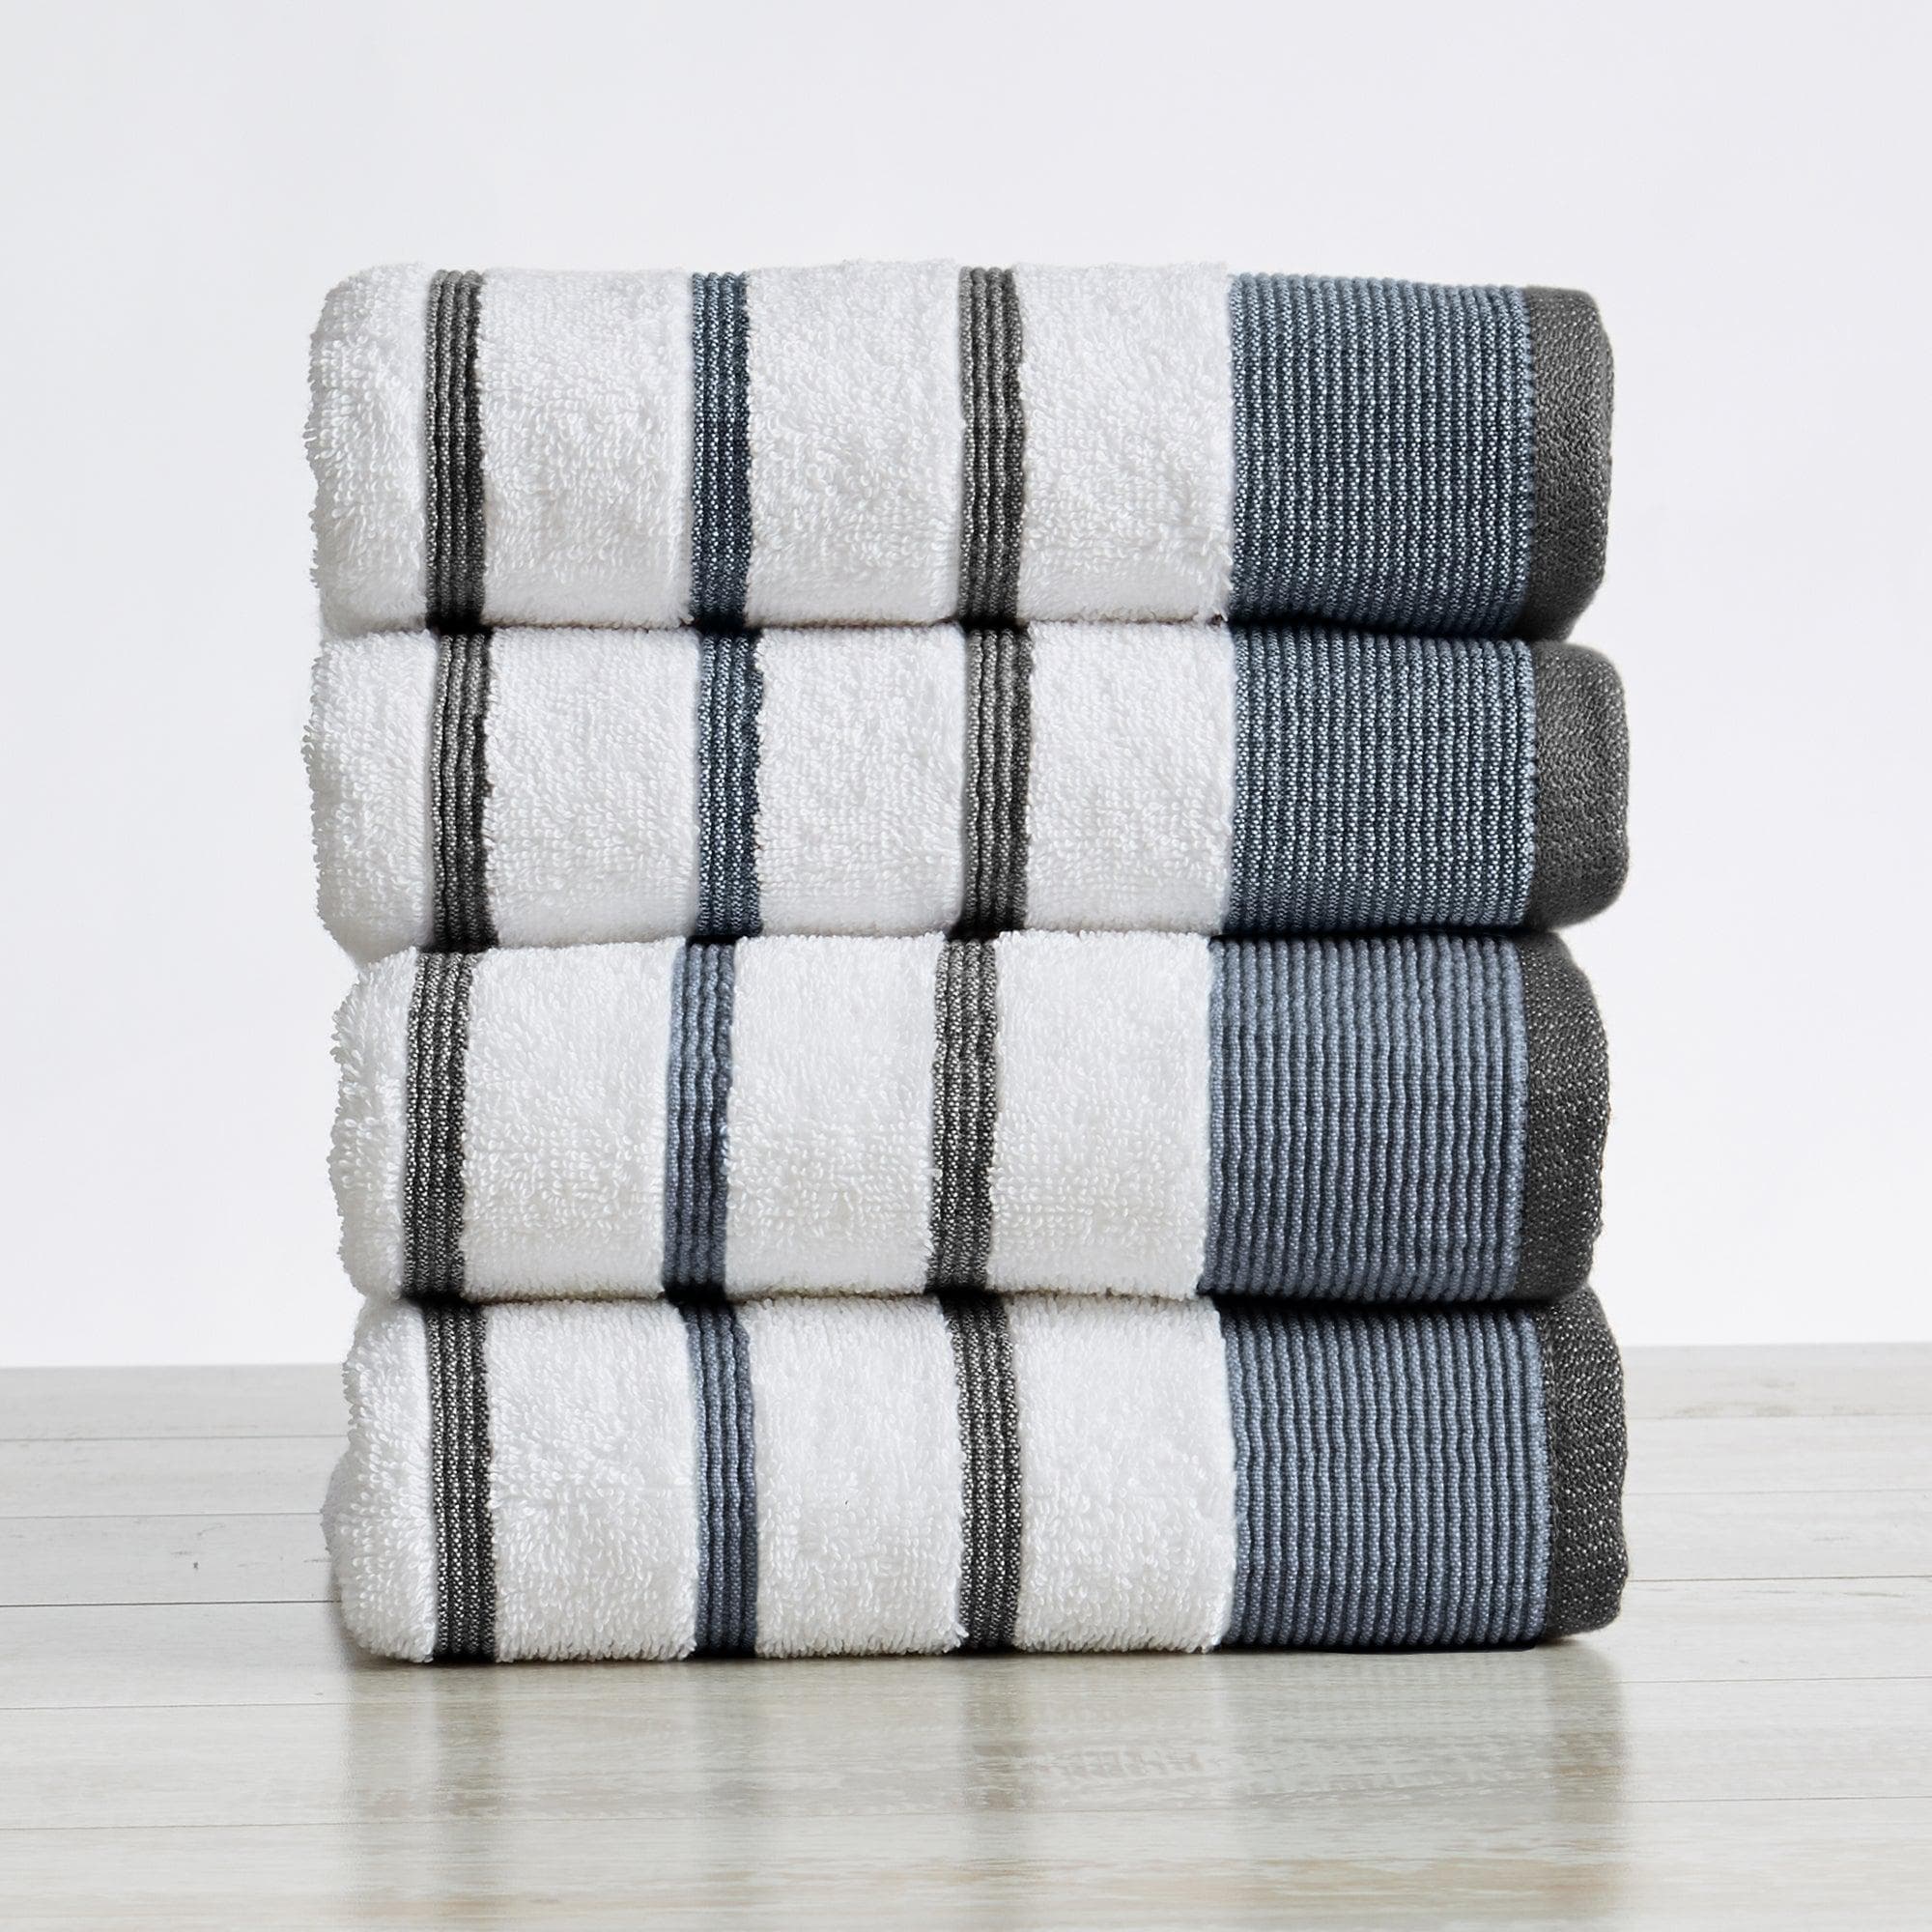 6-Piece Cotton Bath Towel  Noelle Collection by Great Bay Home